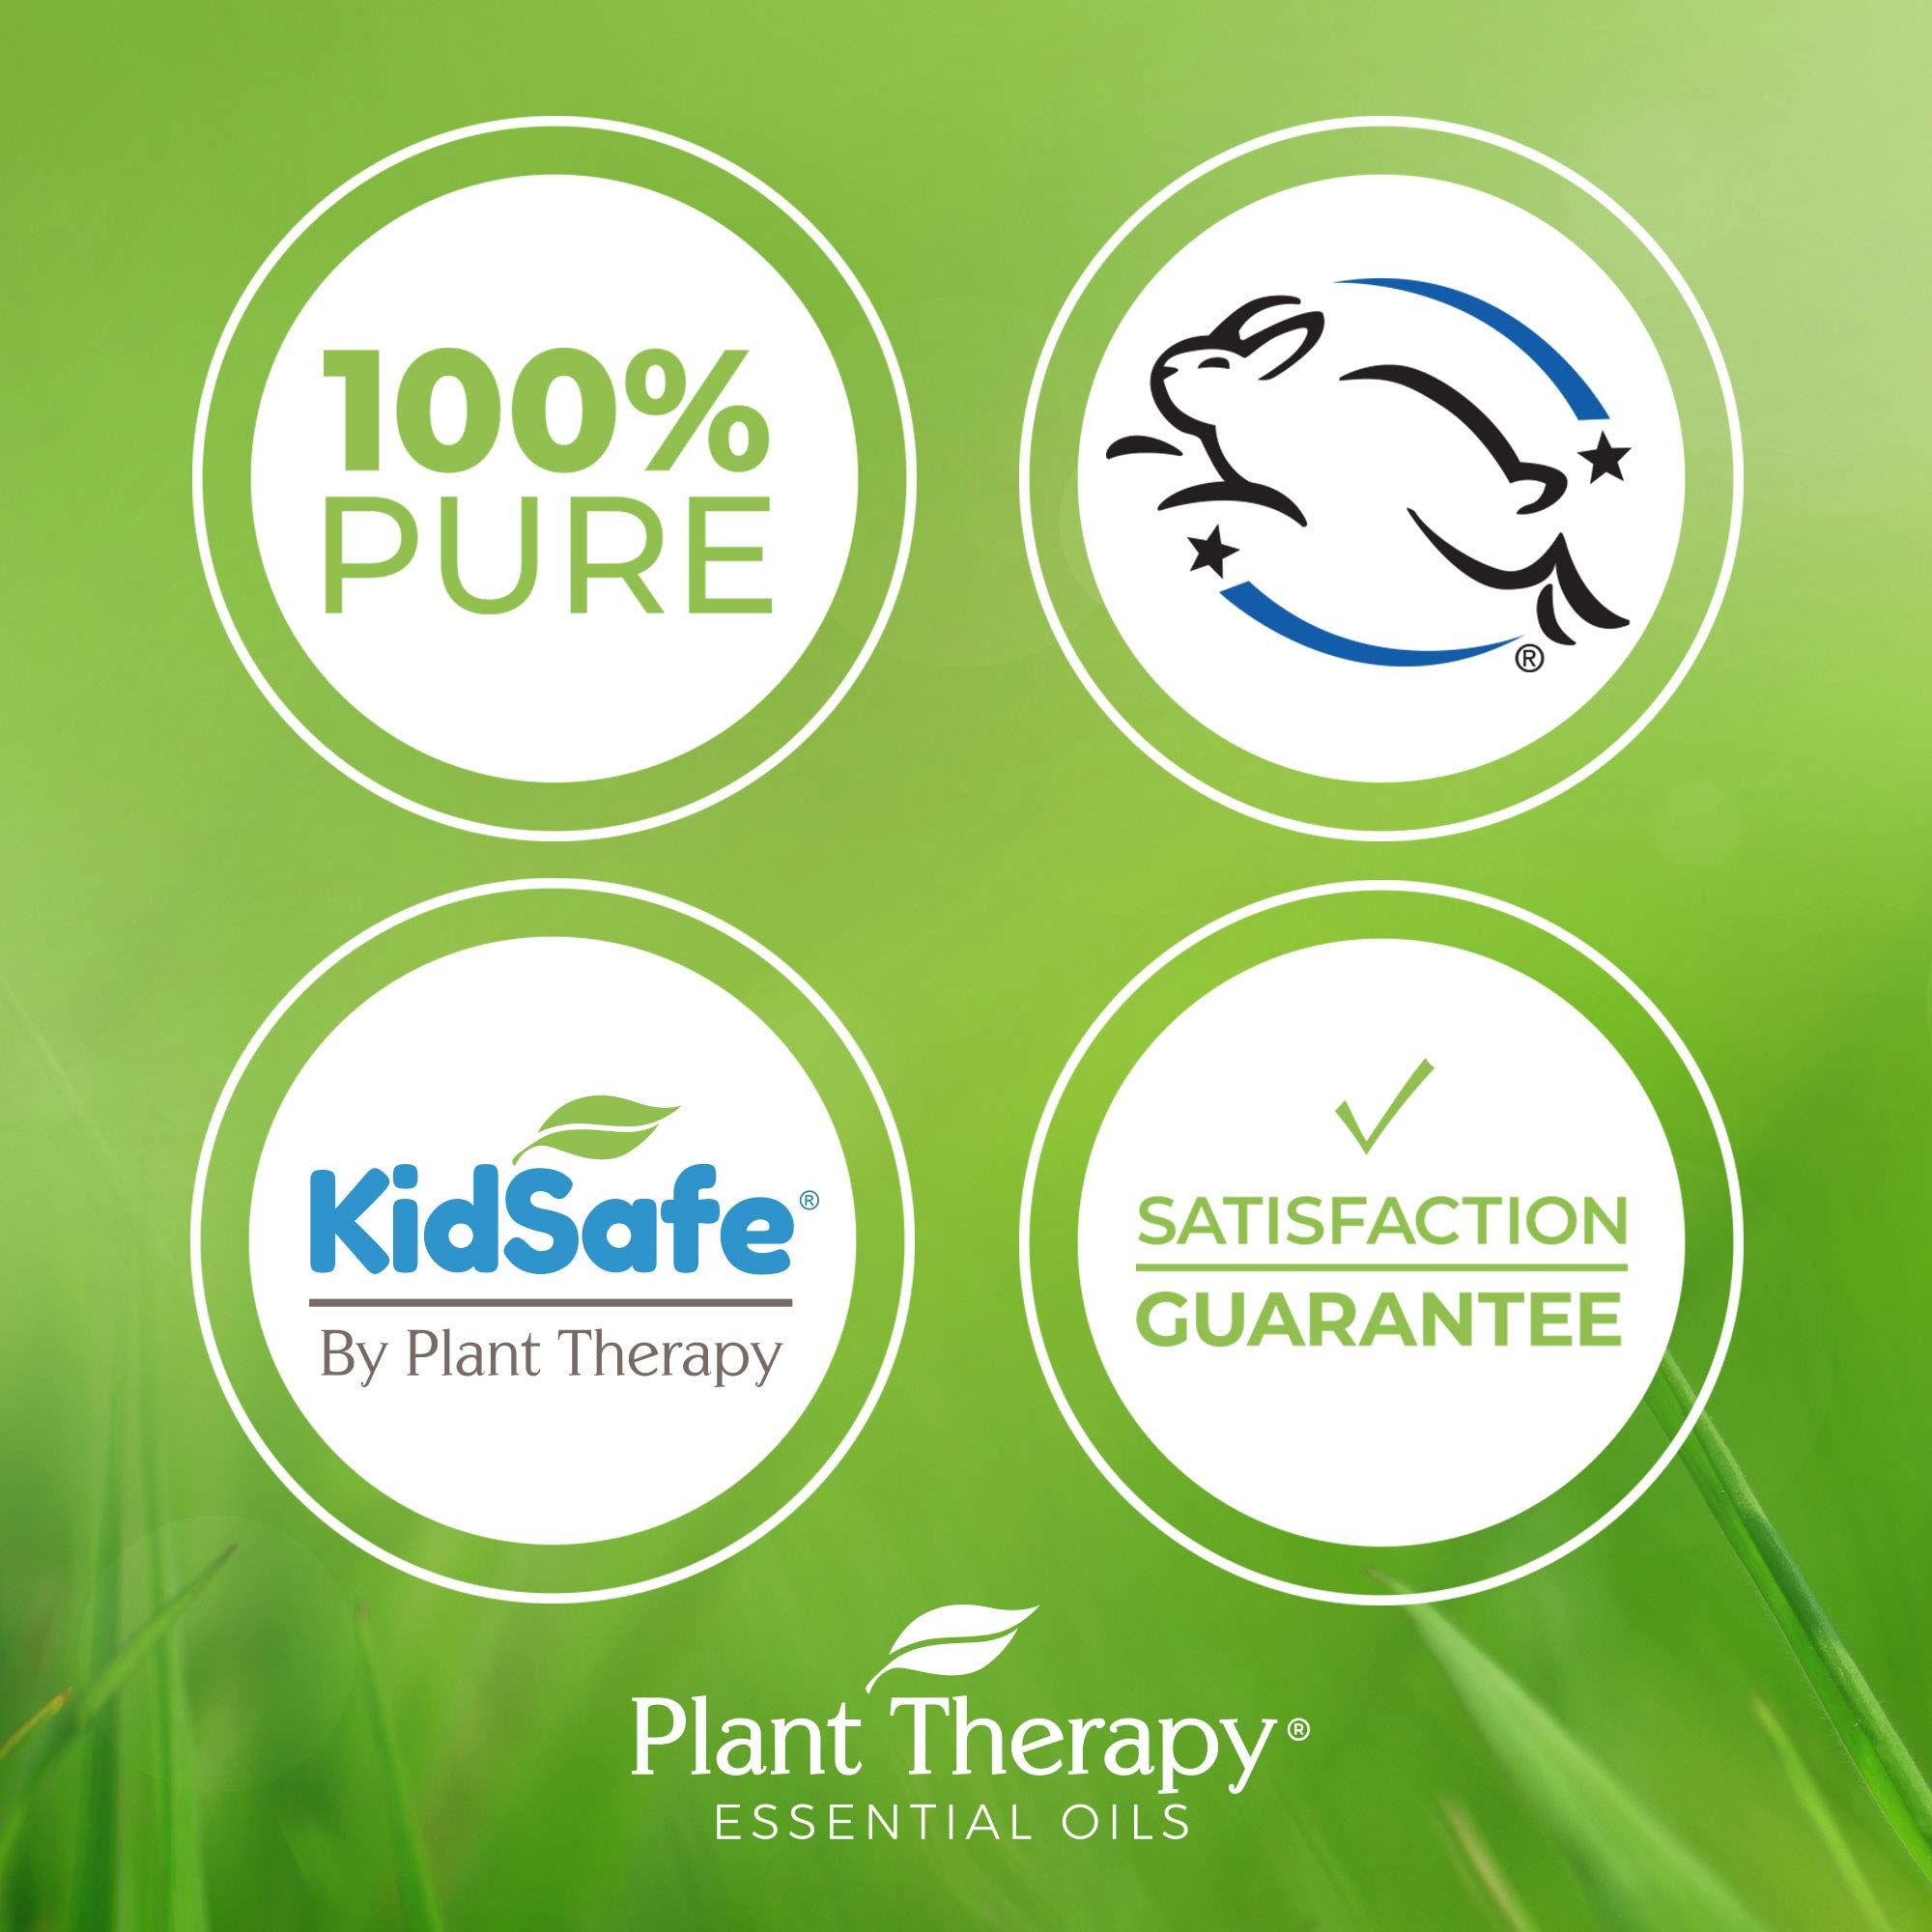 Plant Therapy KidSafe Essentials Roll-On Set 100% Pure, Therapeutic Grade Essential Oils Diluted in Coconut Oil 10 mL (1/3 oz) Each